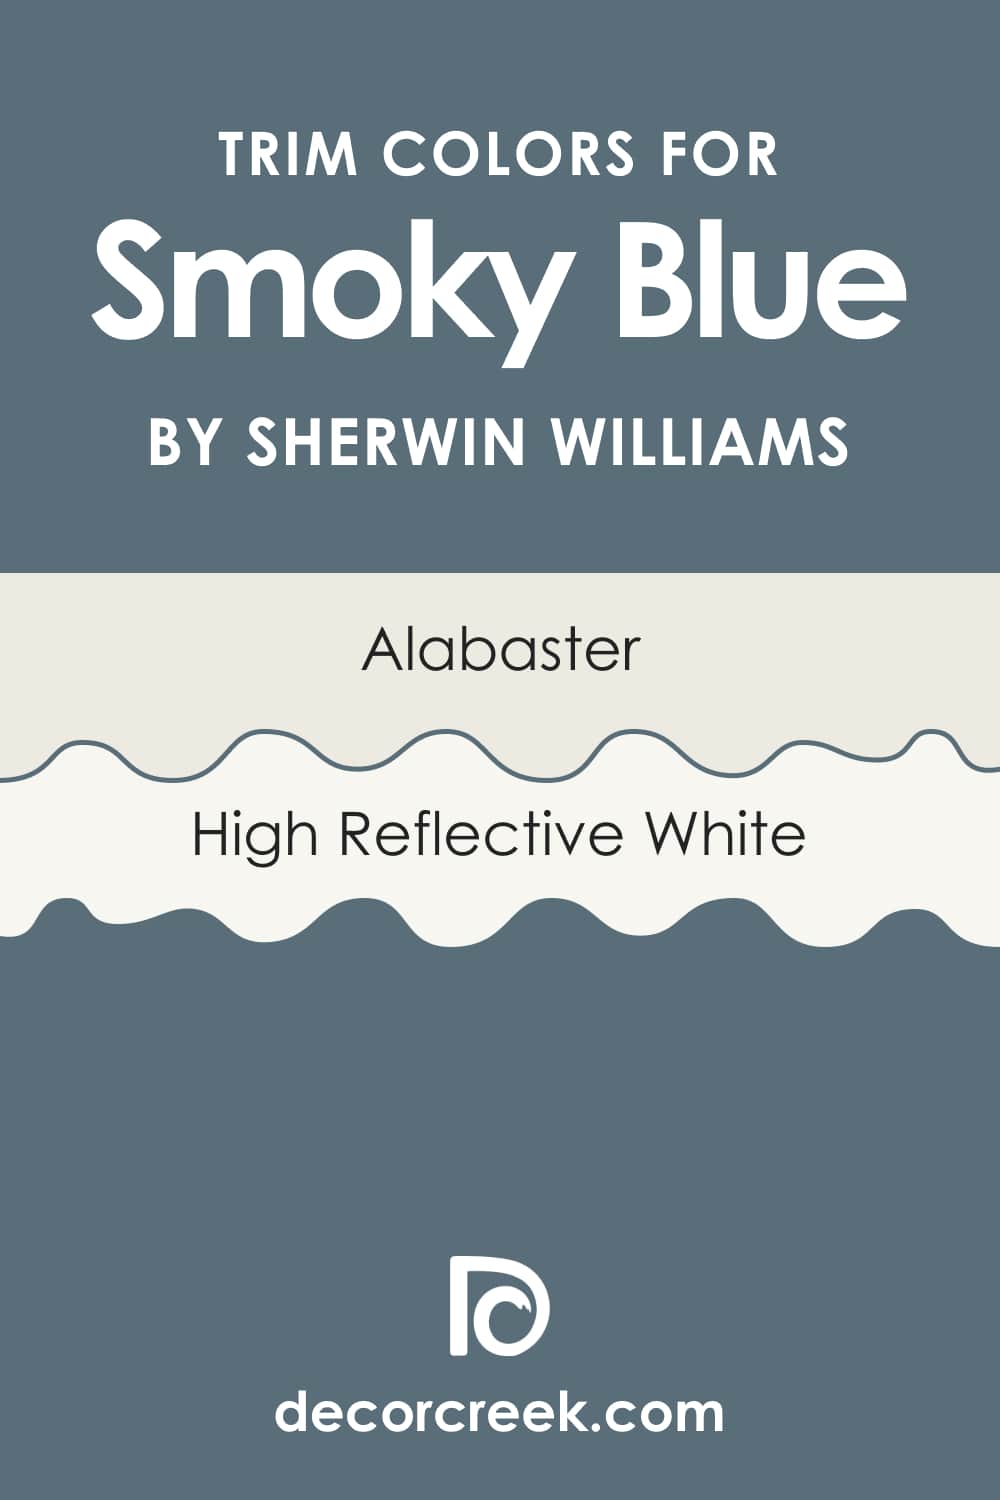 What Is the Best Trim Color to Use With Smoky Blue SW-7604?